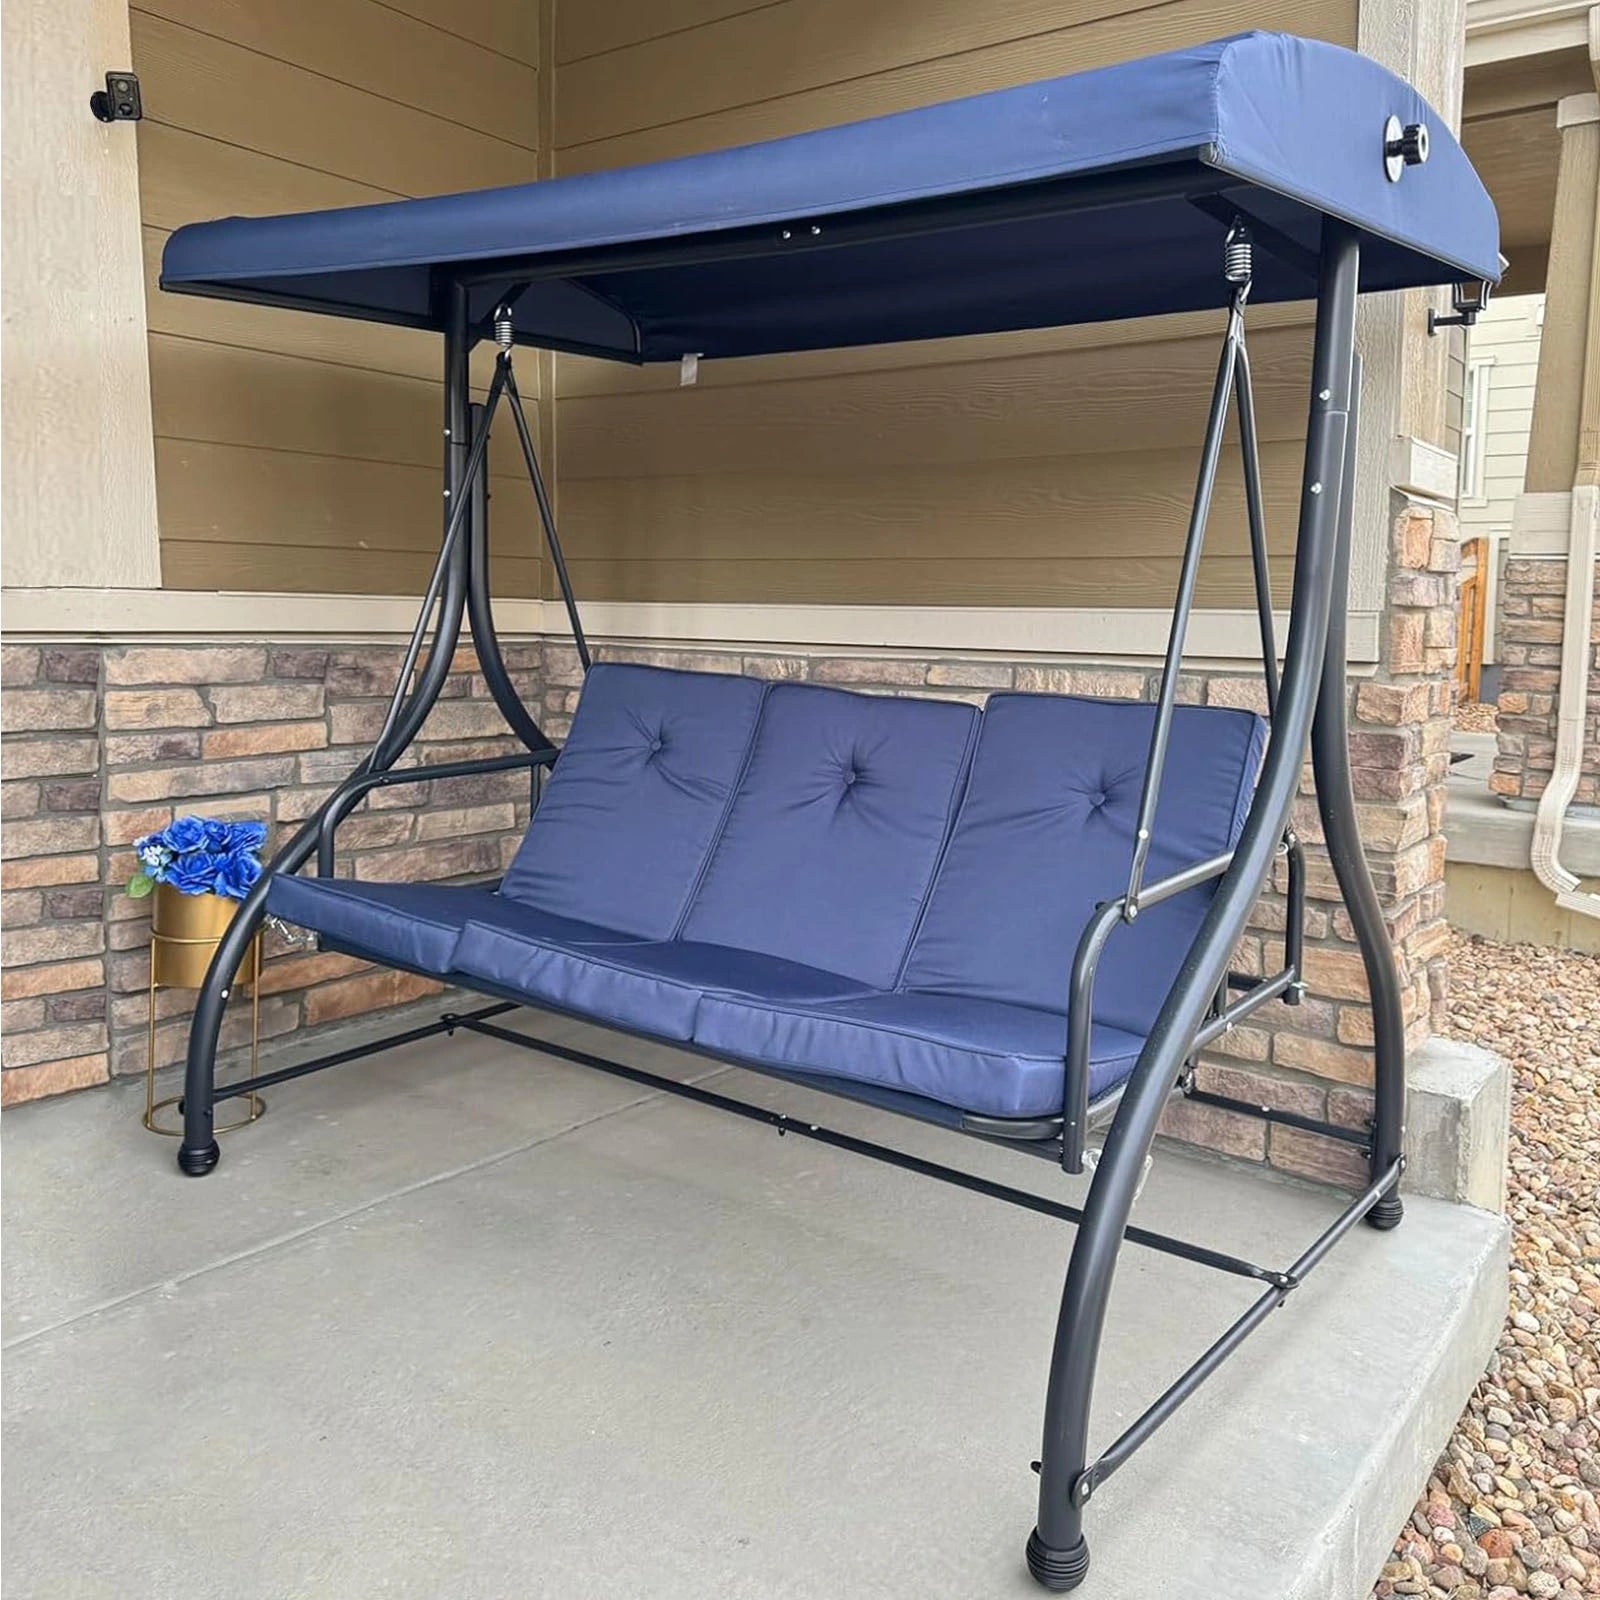 FUNG YARD Outdoor Seating 3 Person Porch Swing Chair Gazebo